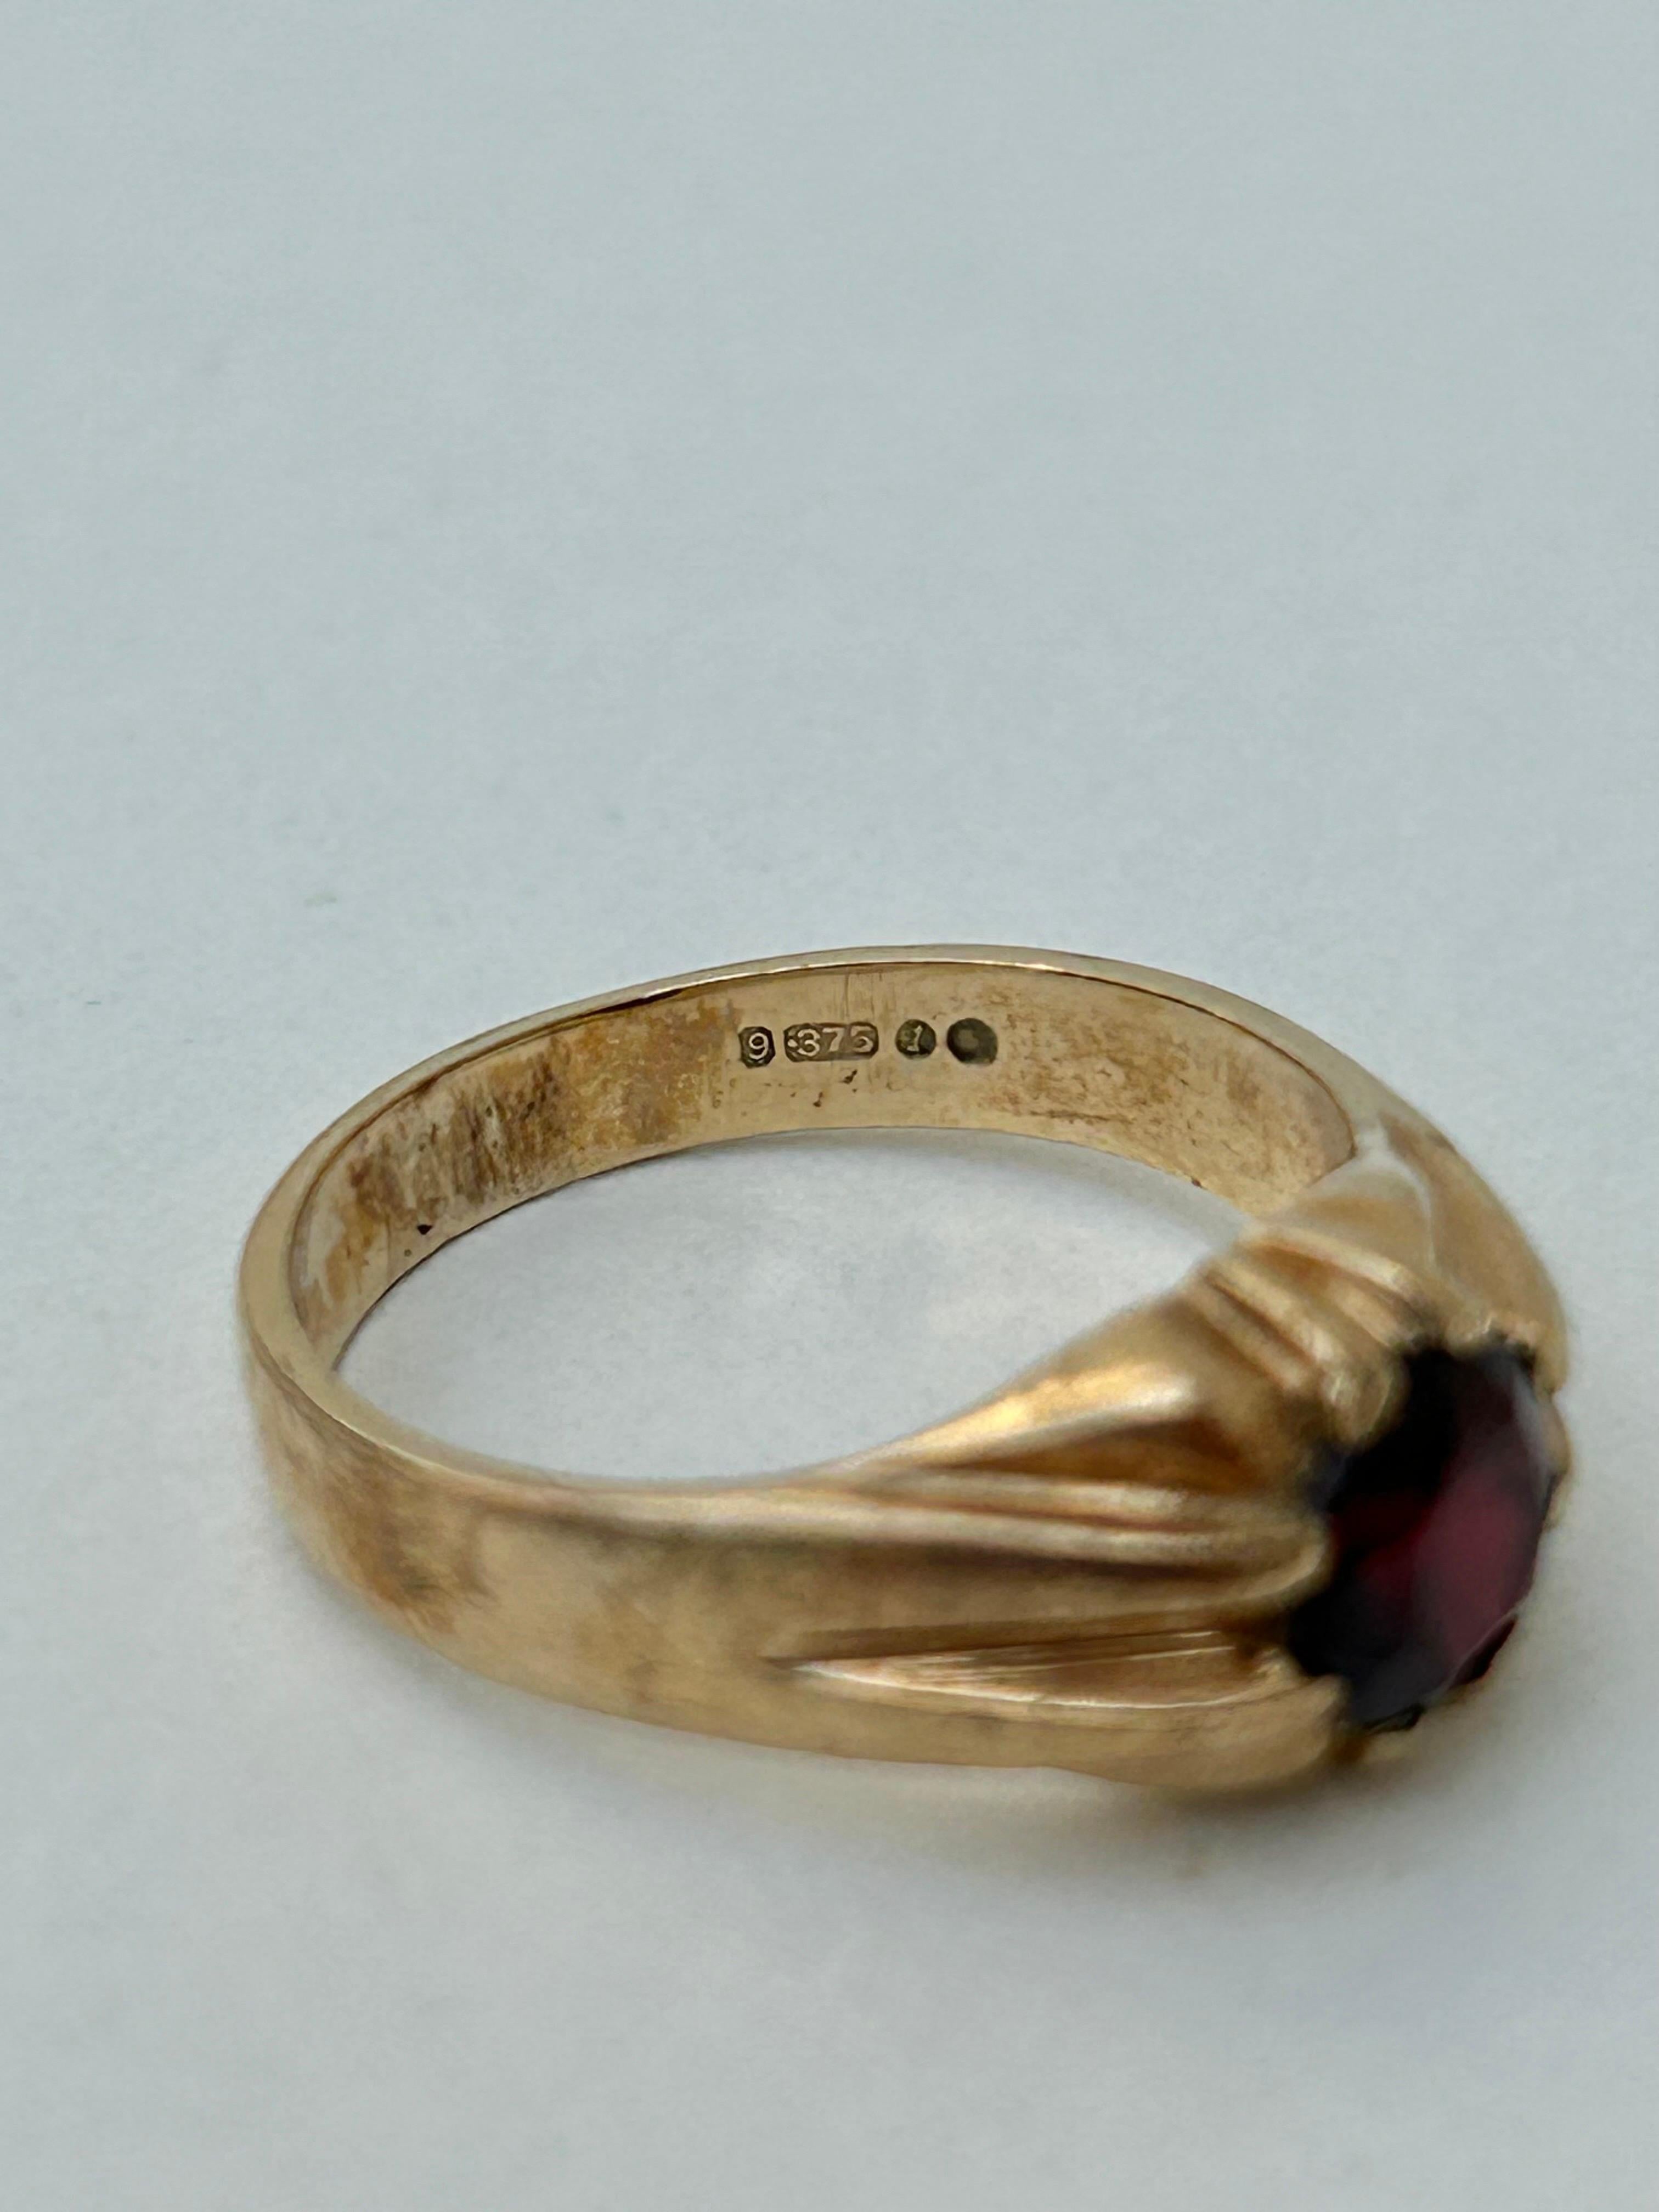 Chunky Vintage 9 Carat Gold Garnet Signet Ring In Good Condition For Sale In Chipping Campden, GB